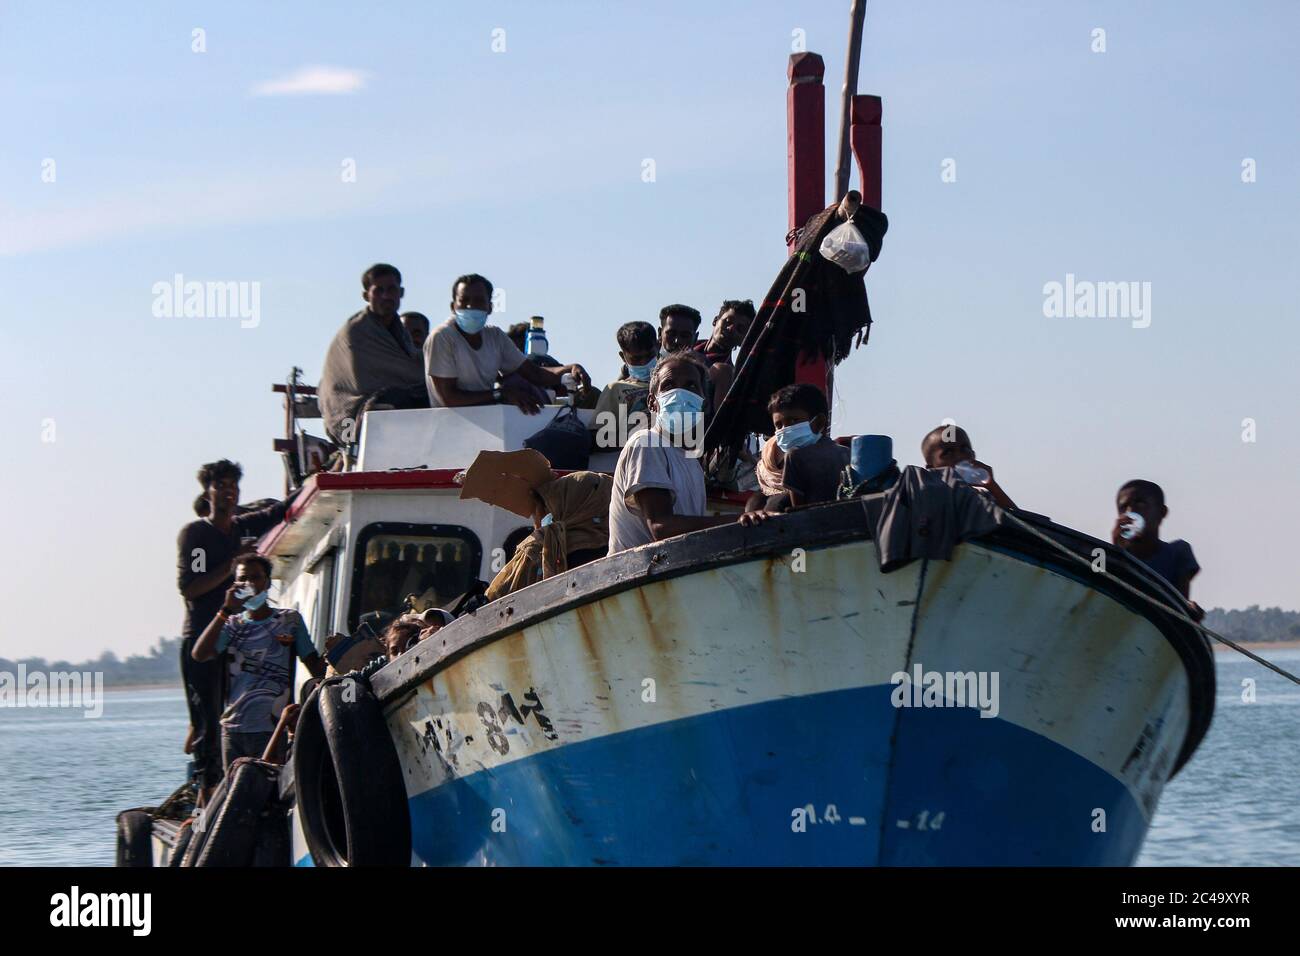 Aceh Utara, Indonesia. 25th June, 2020. A wooden boat seen 1 kilometre from the coast in North Aceh Regency carrying dozens of Rohingya people.According to local officials, as many as 94 Rohingyas were found by Acehnese fishermen stranded in the middle of the sea waters 1 kilometre from the coast off Aceh Province using wooden boats. Credit: SOPA Images Limited/Alamy Live News Stock Photo